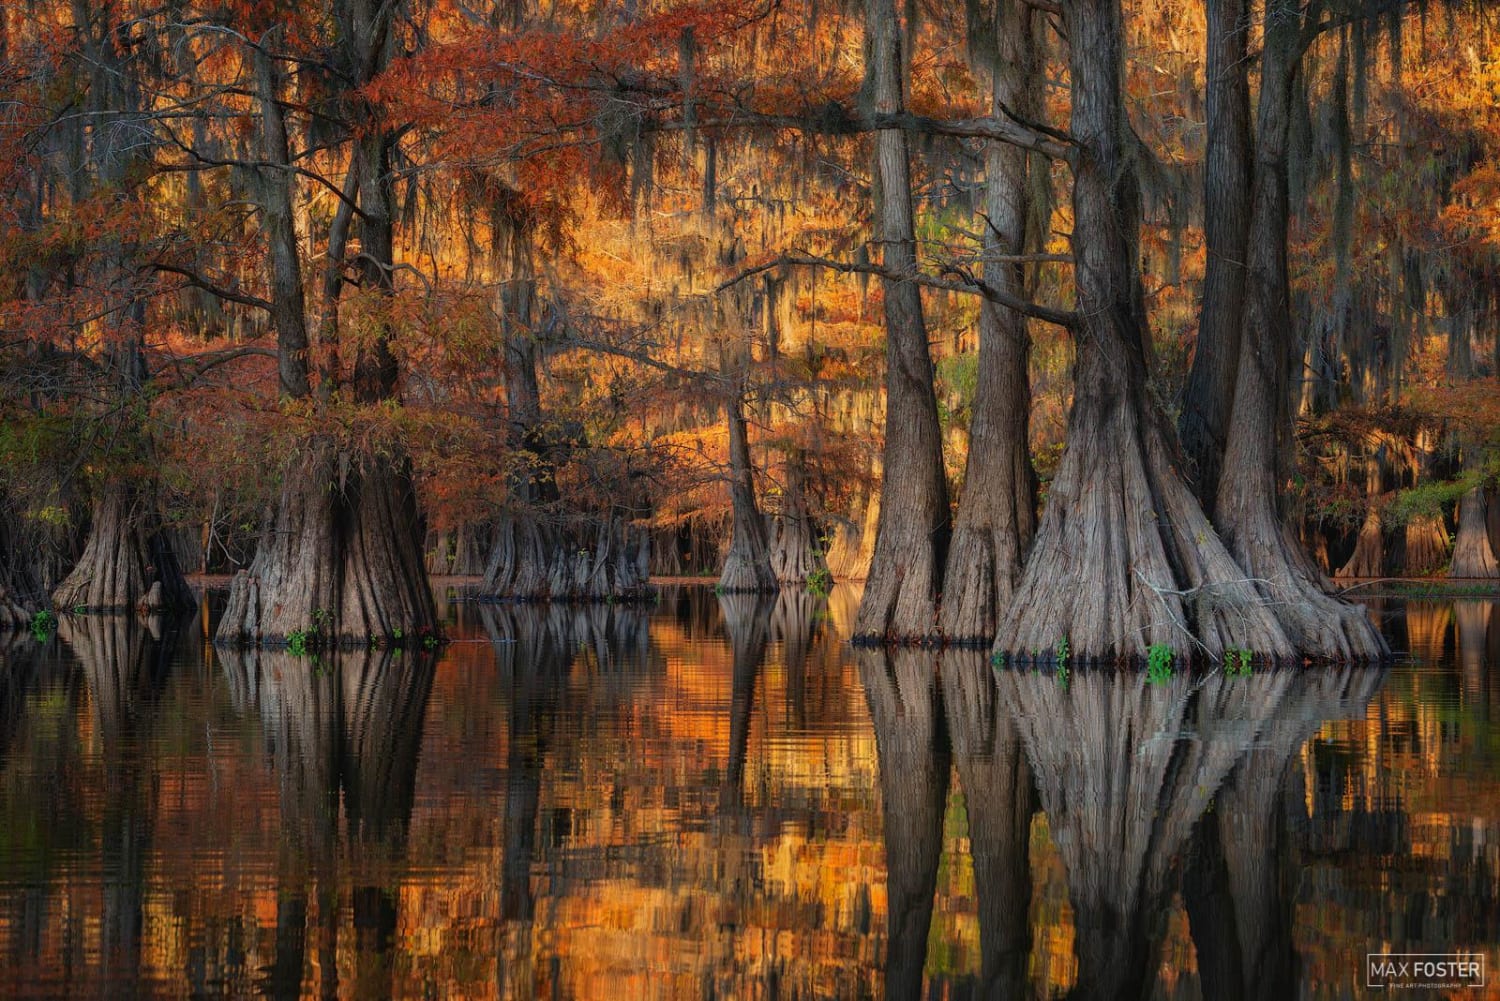 Golden Glory - Autumn in the bayou is incredible! Texas